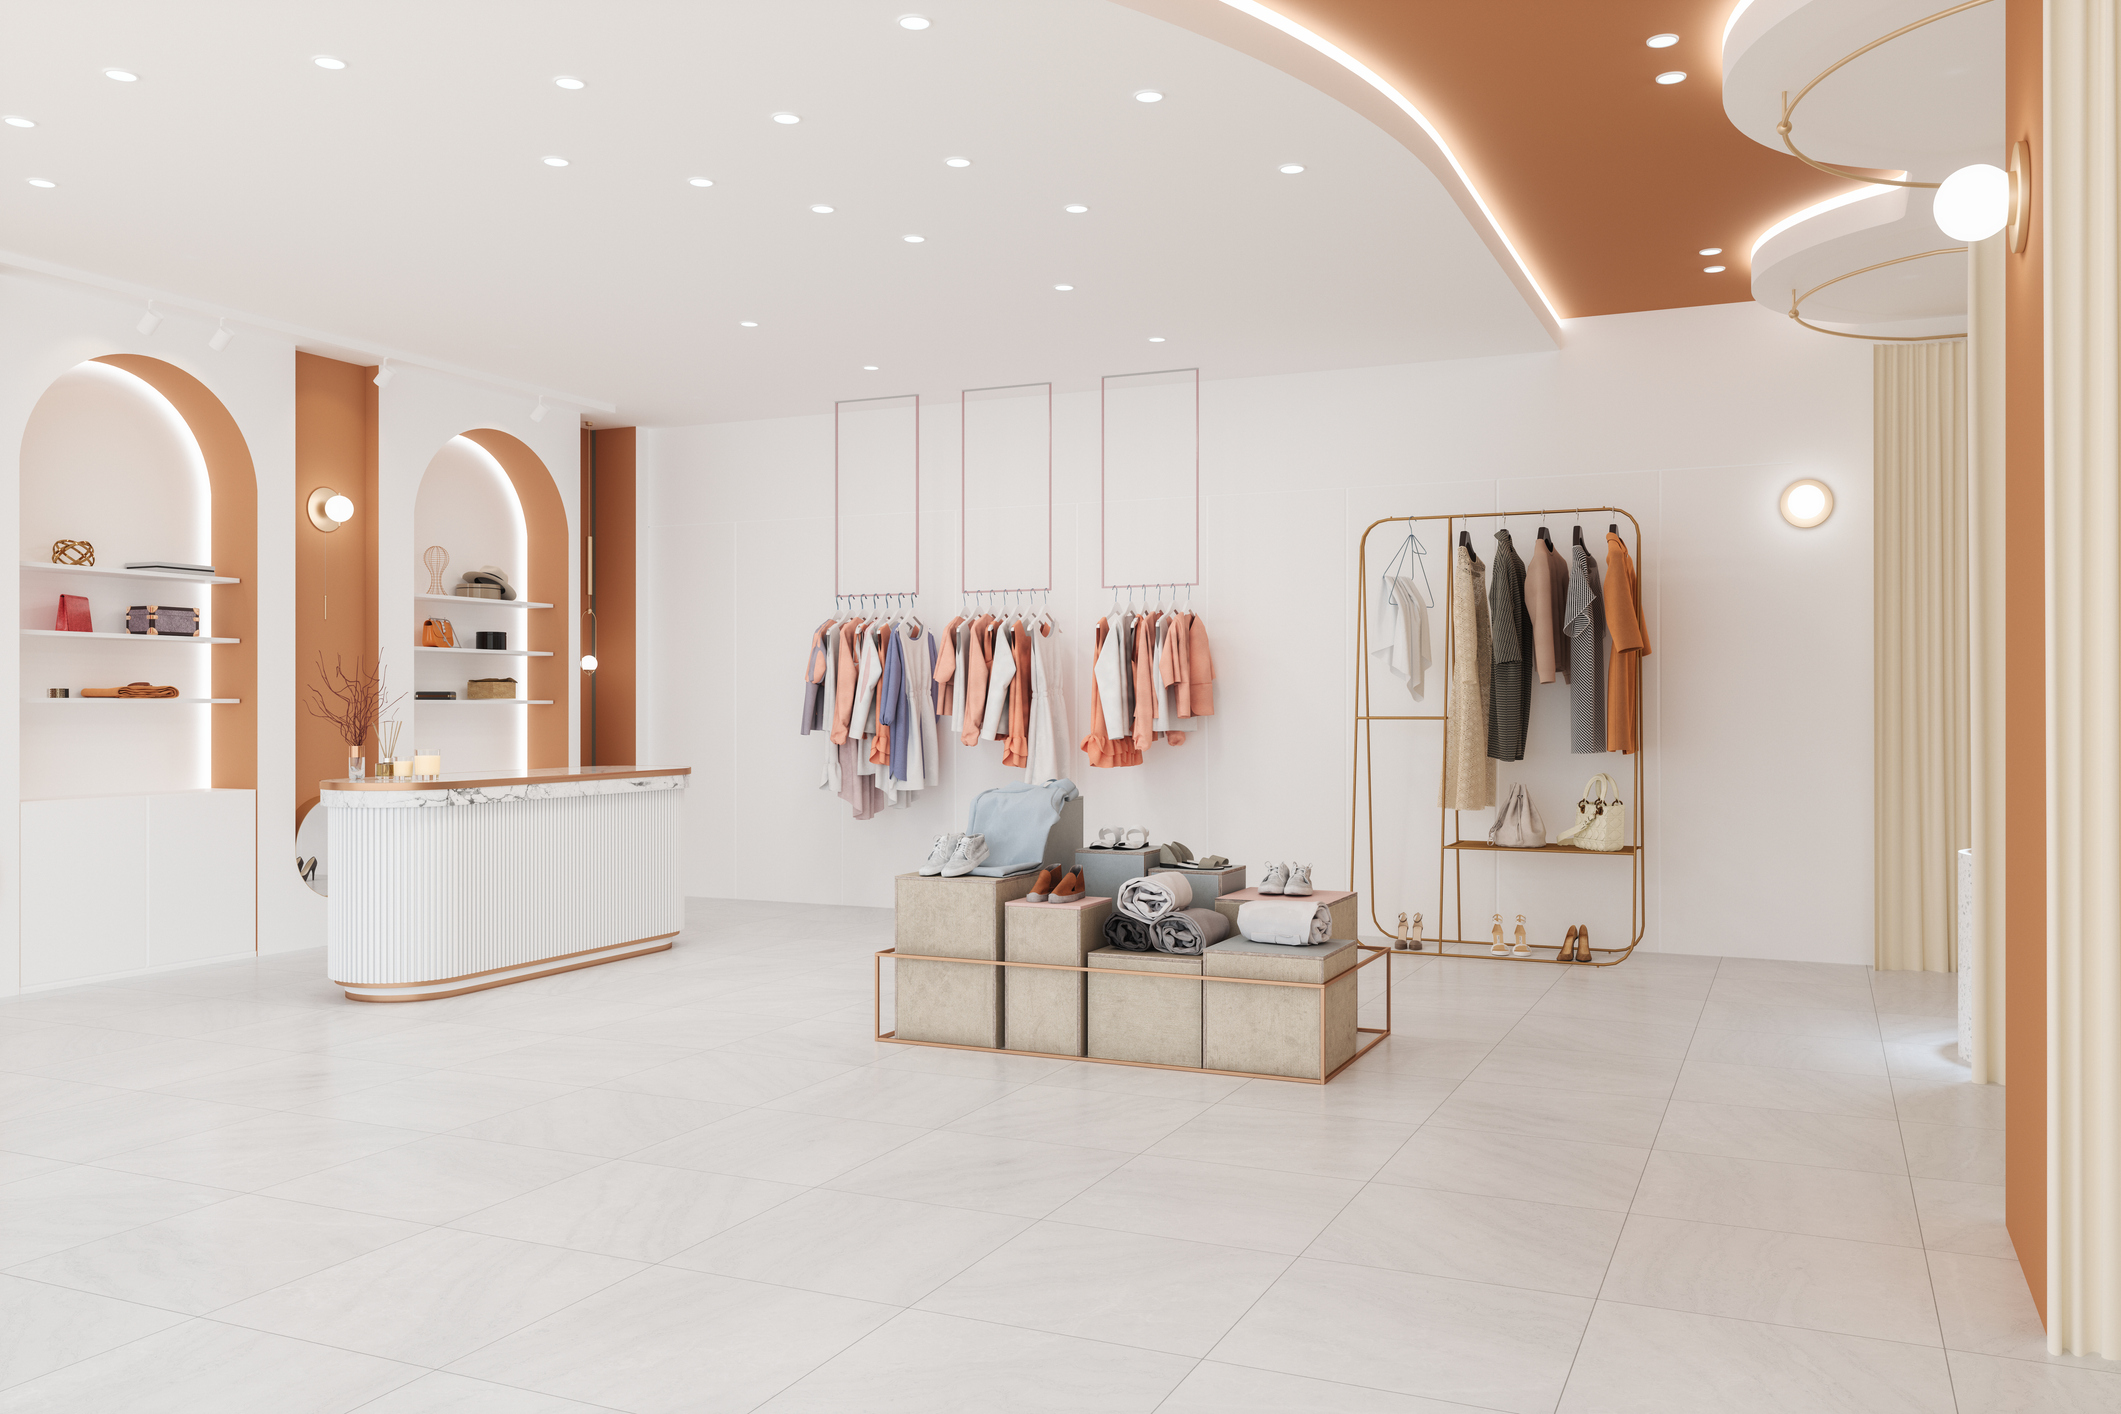 Luxury Clothing Store Interior With Clothes, Shoes And Personal Accessories